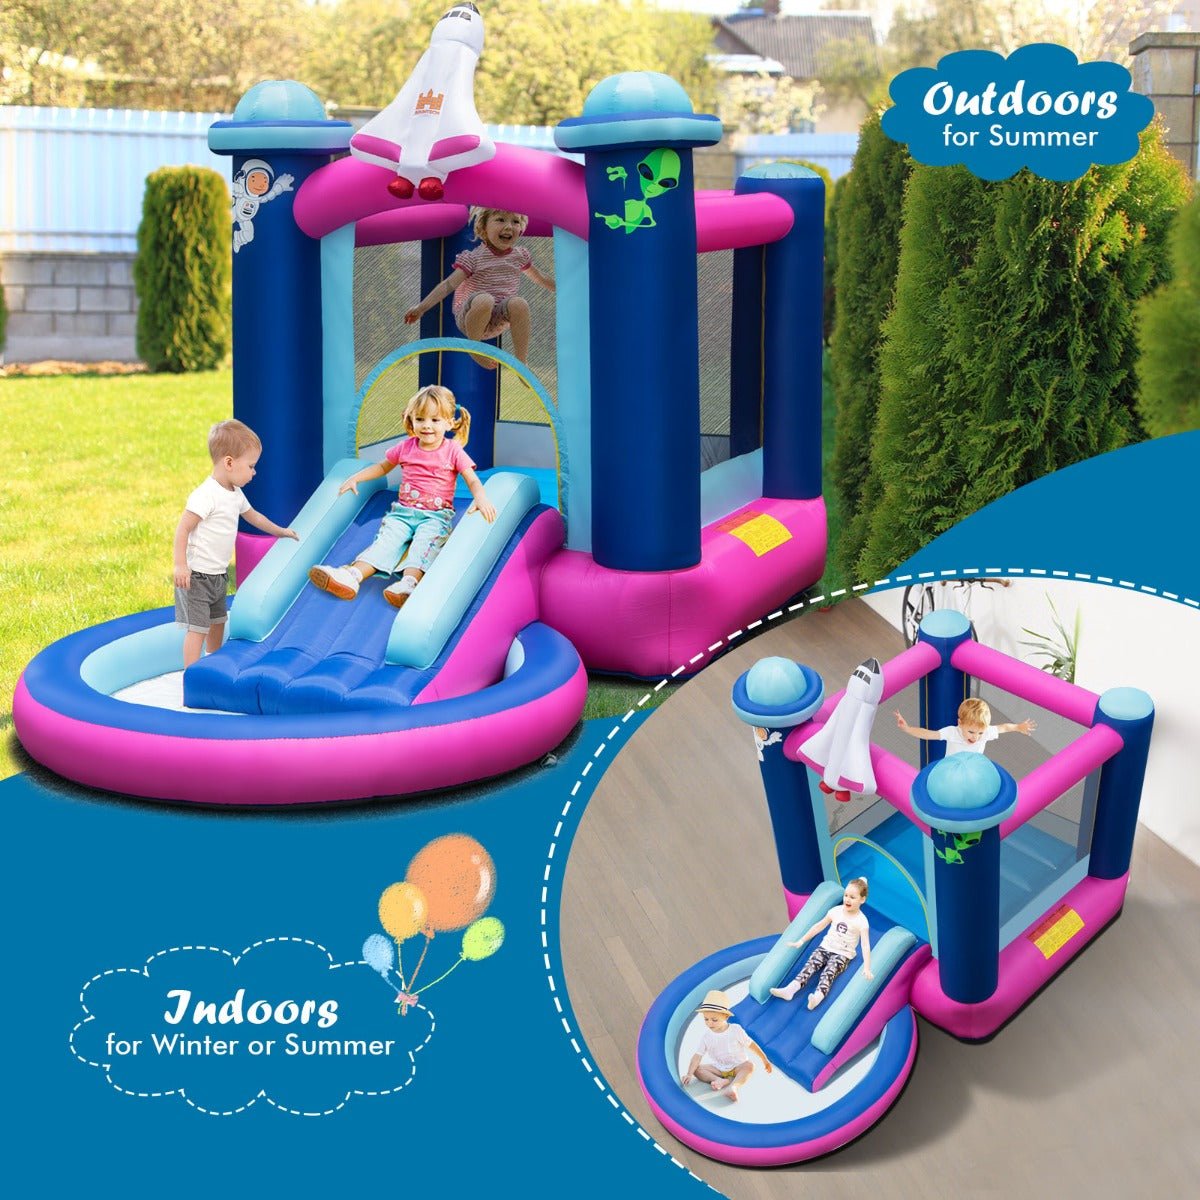 3-in-1 Inflatable Space Bouncer - Jump, Slide & Explore the Universe